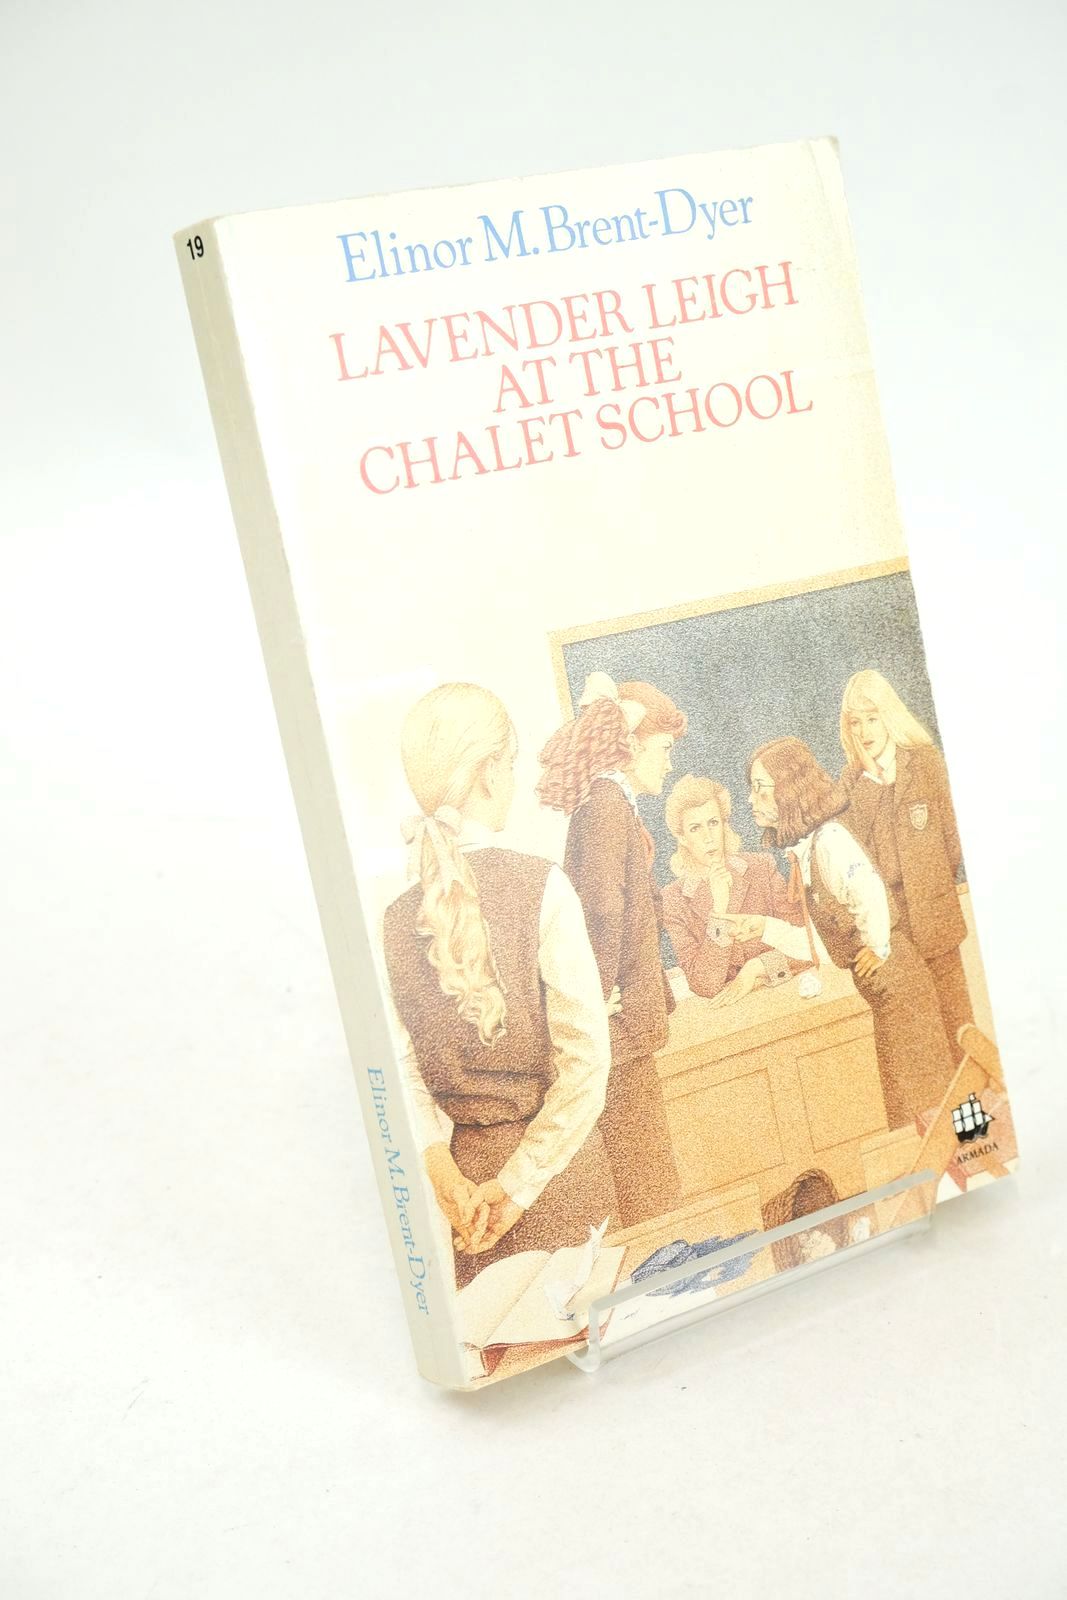 Photo of LAVENDER LEIGH AT THE CHALET SCHOOL- Stock Number: 1325802